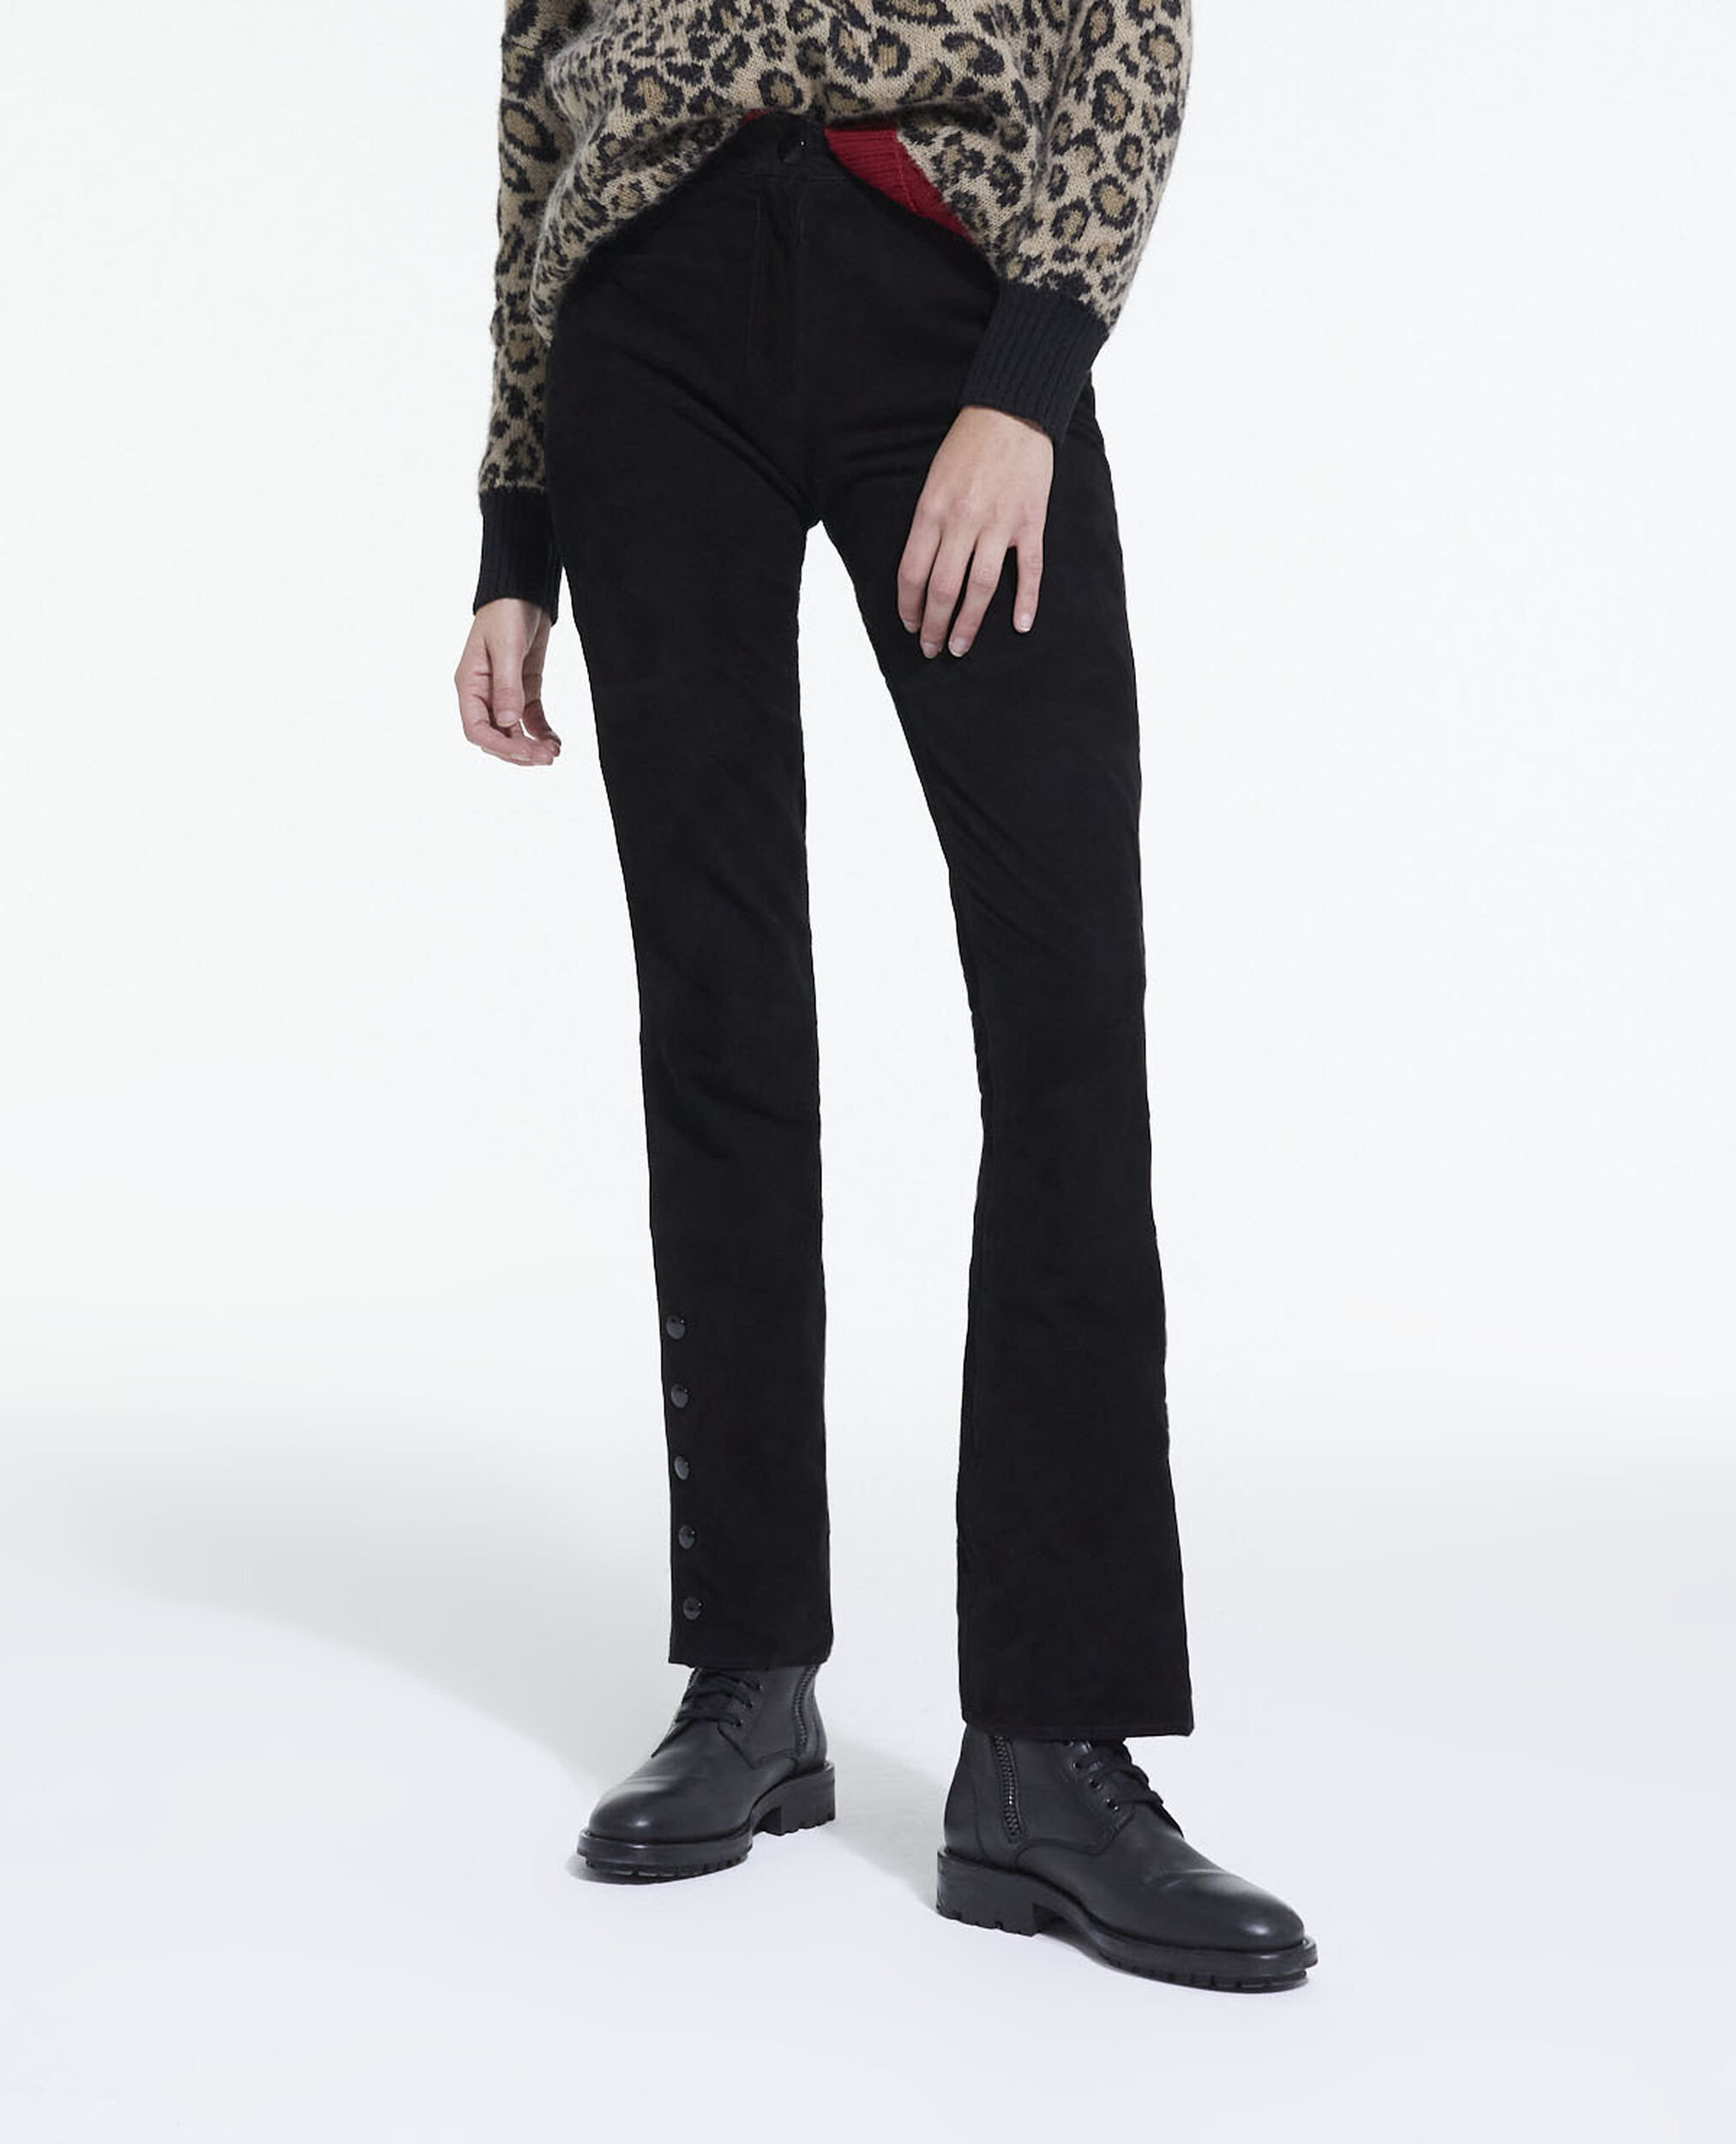 Black suede leather straight-cut pants, BLACK, hi-res image number null